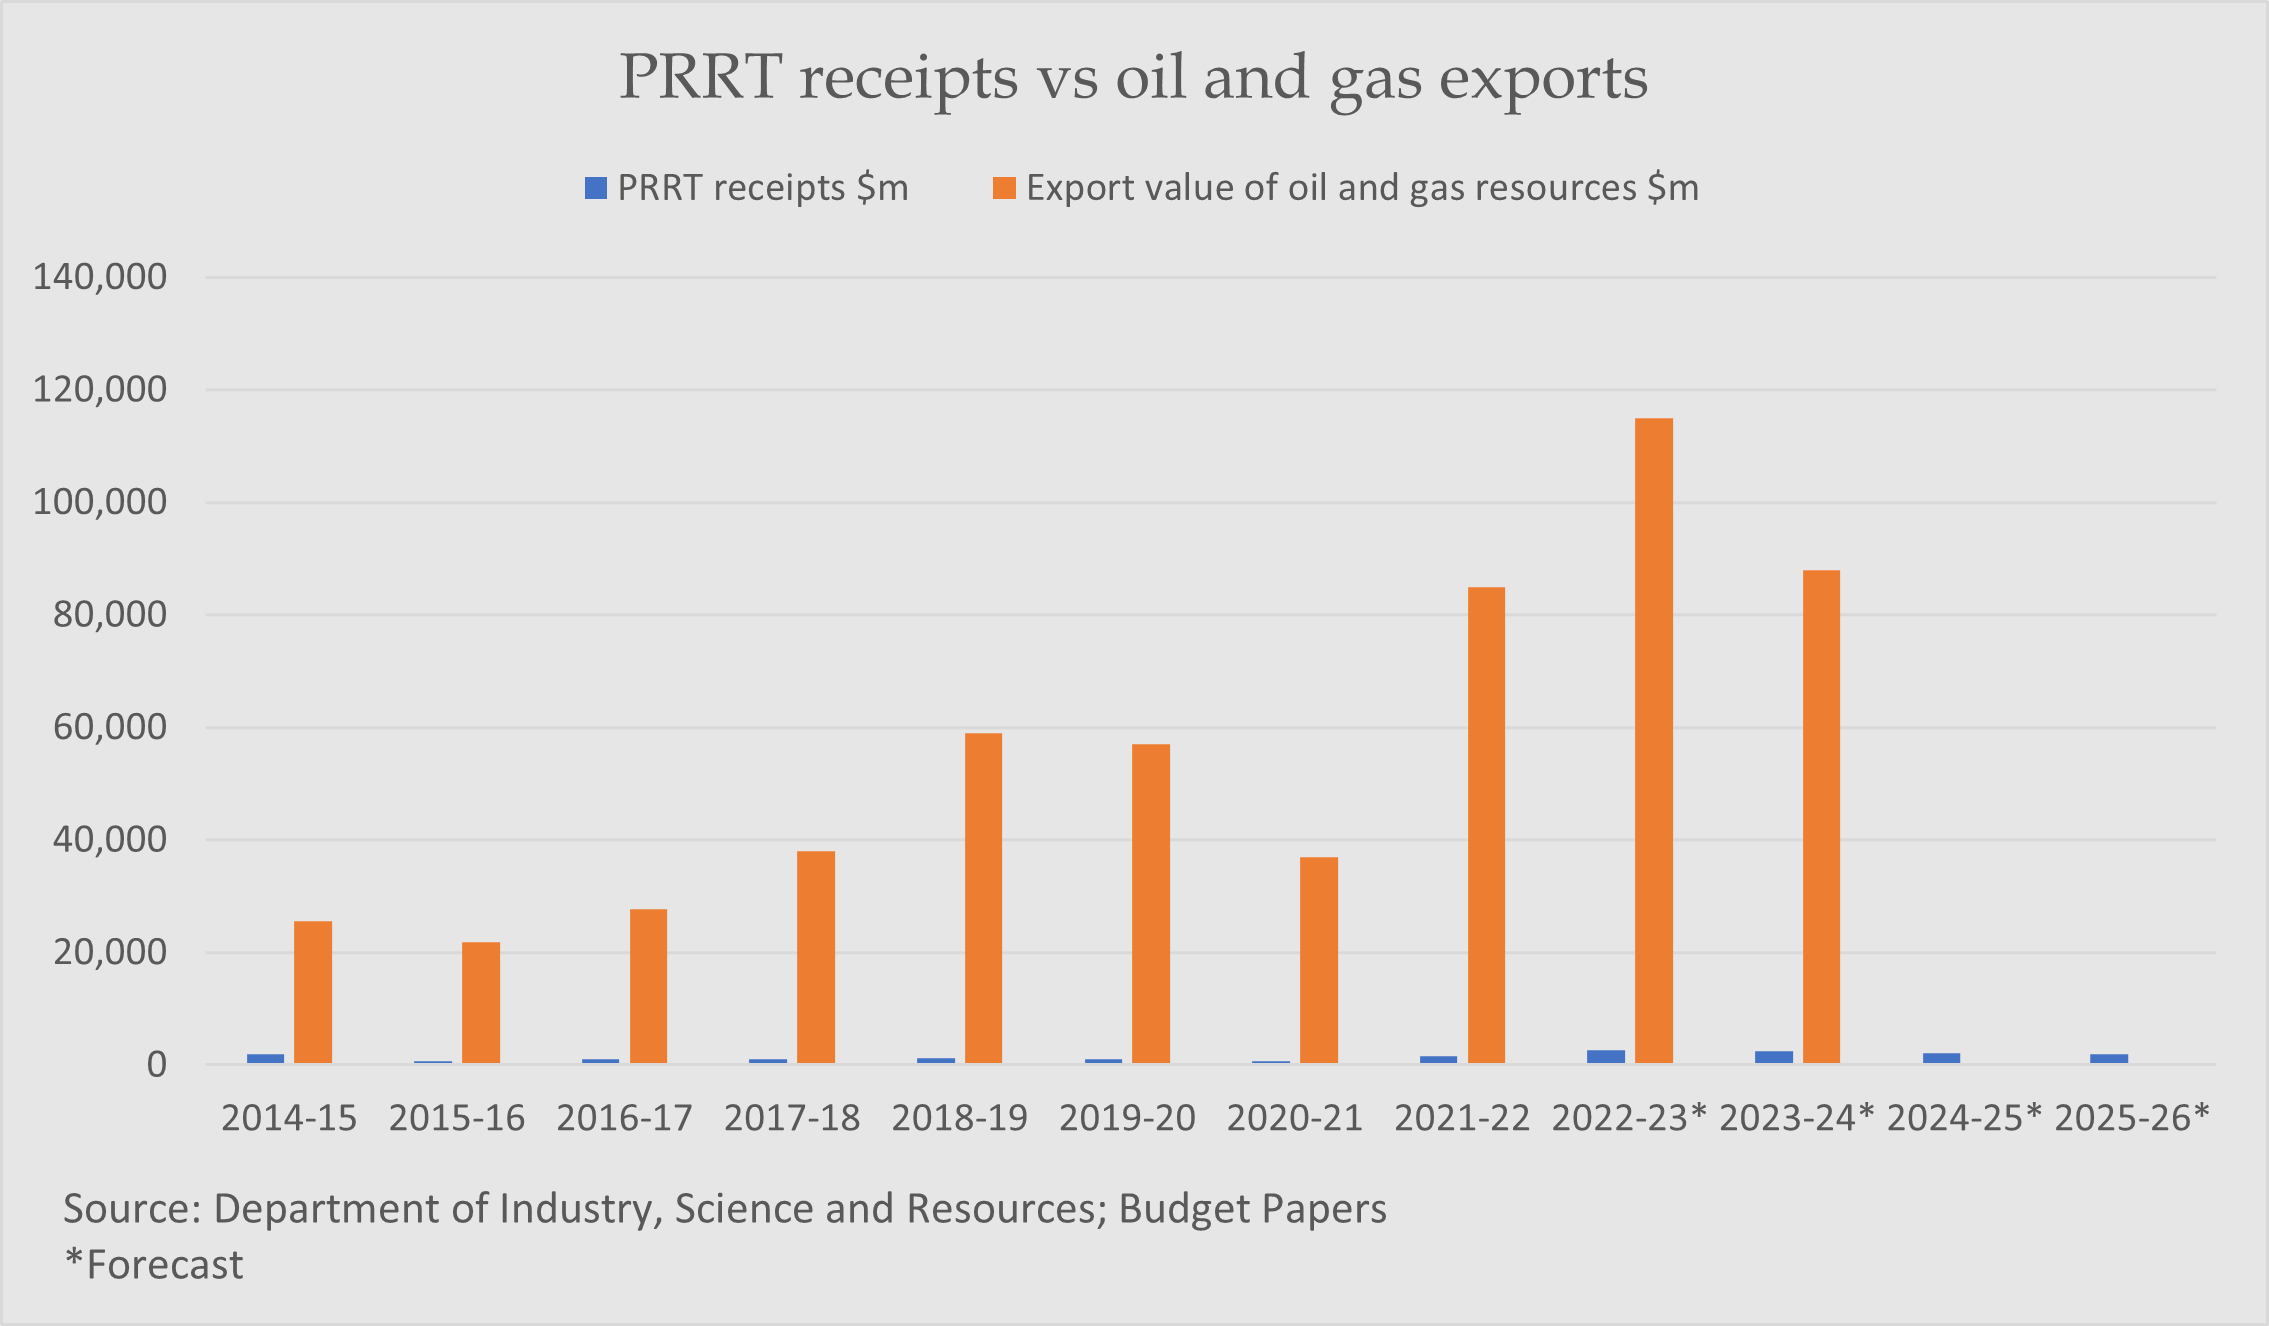 Bar chart comparing PRRT receipts with oil and gas export values